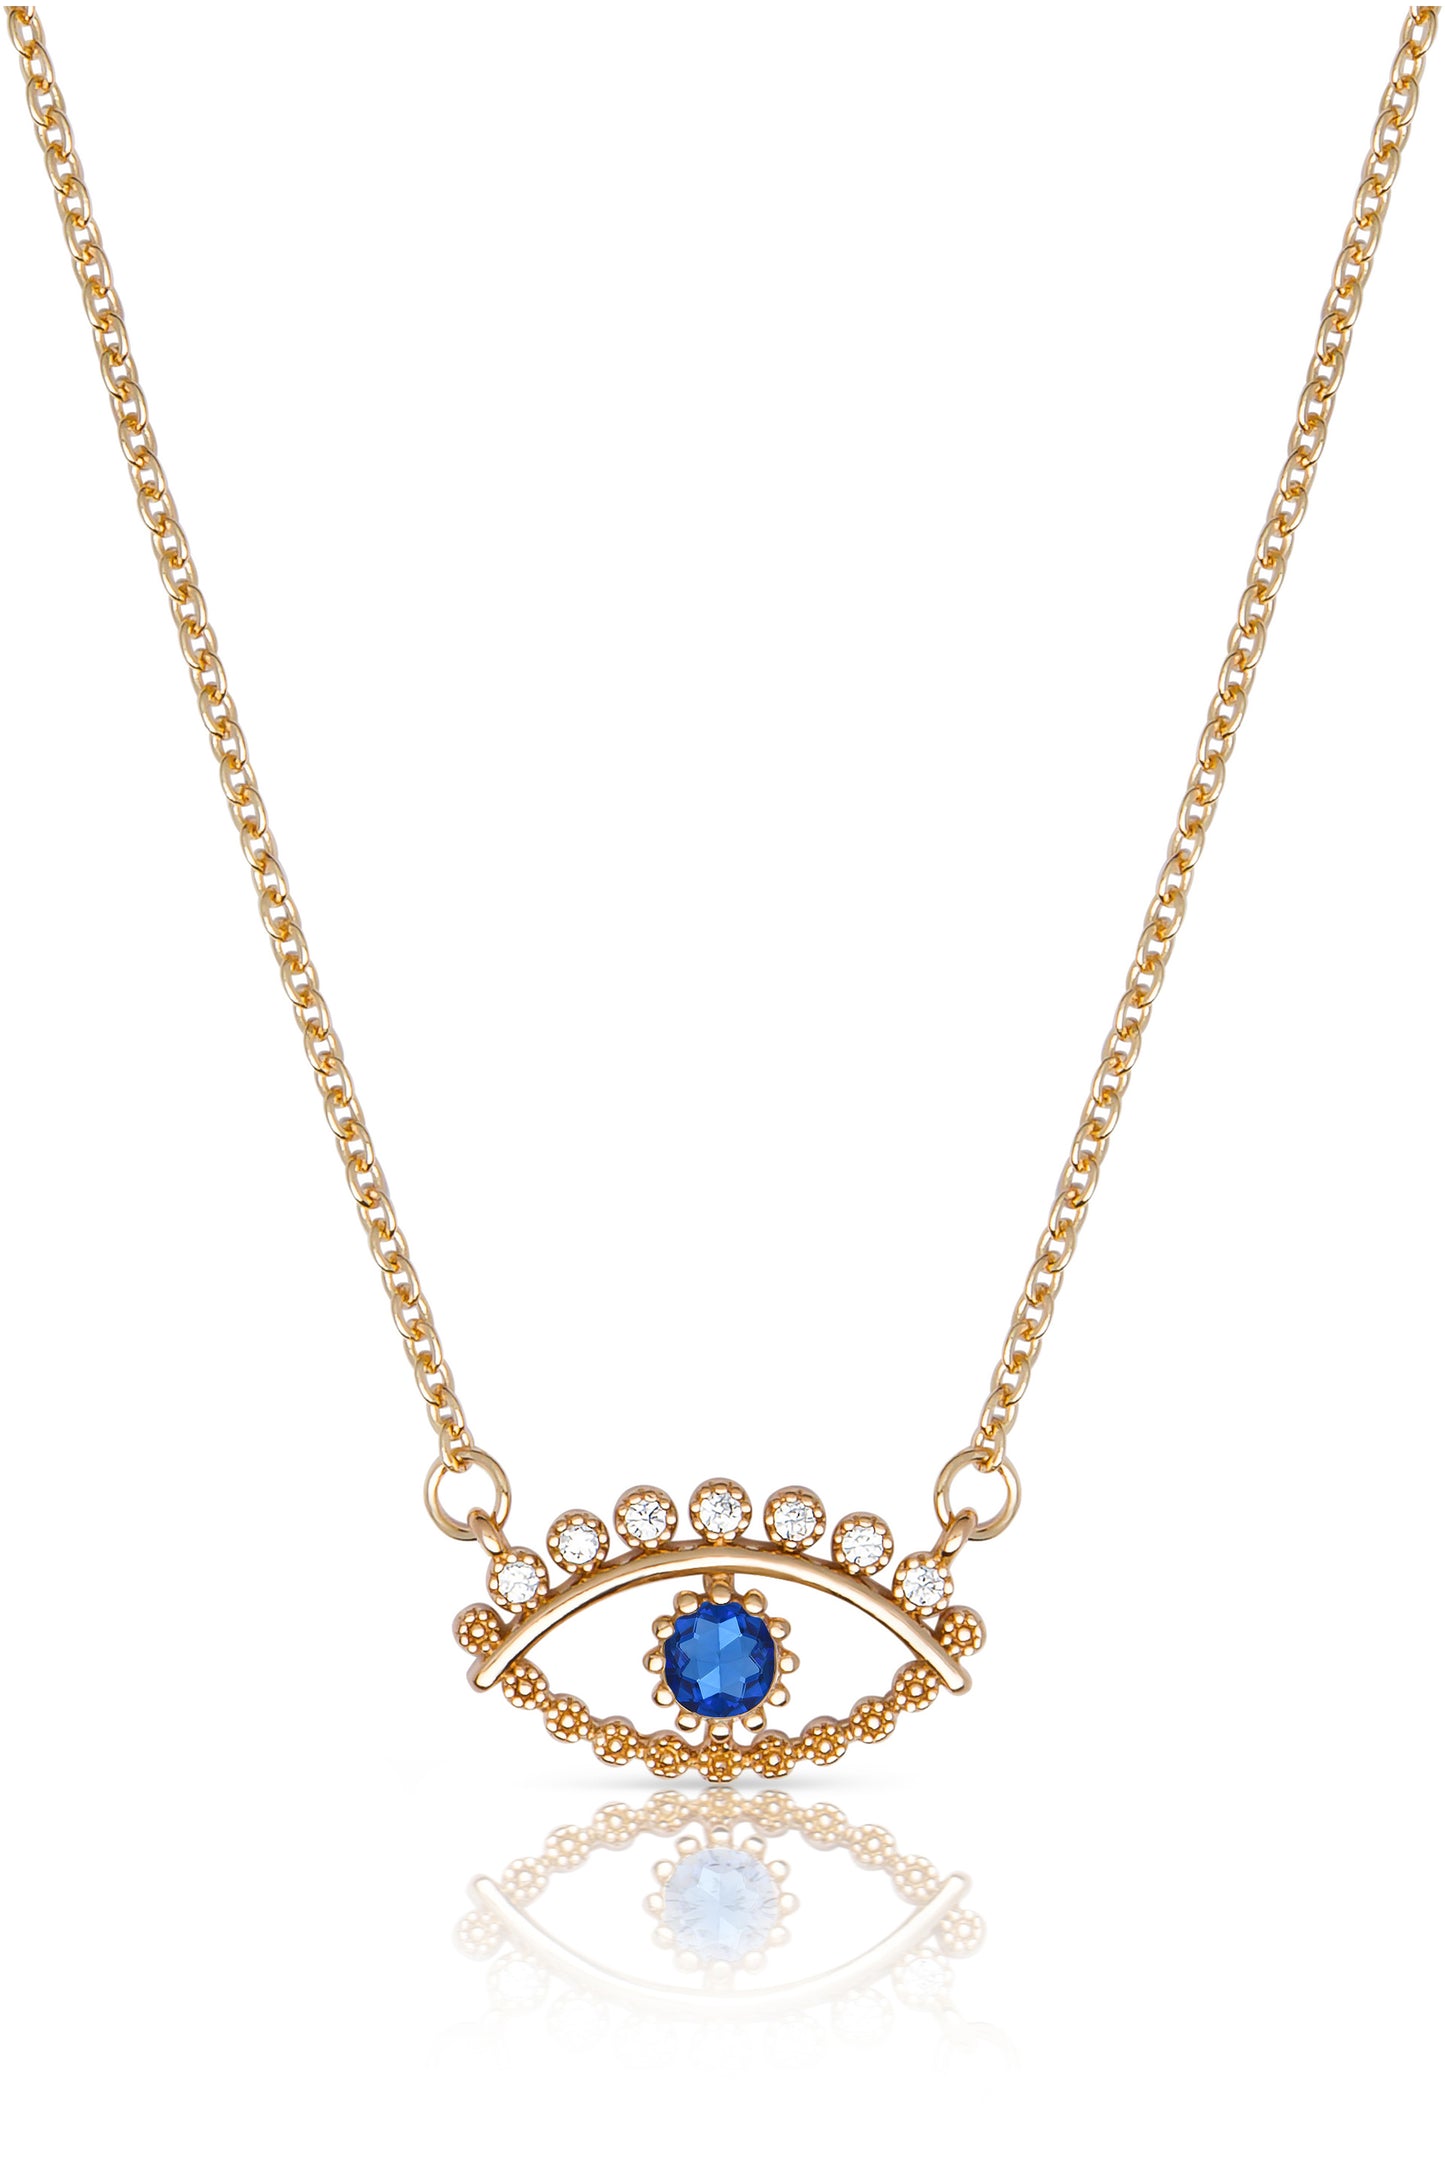 All Knowing Eye Crystal and 18k Gold Plated Necklace